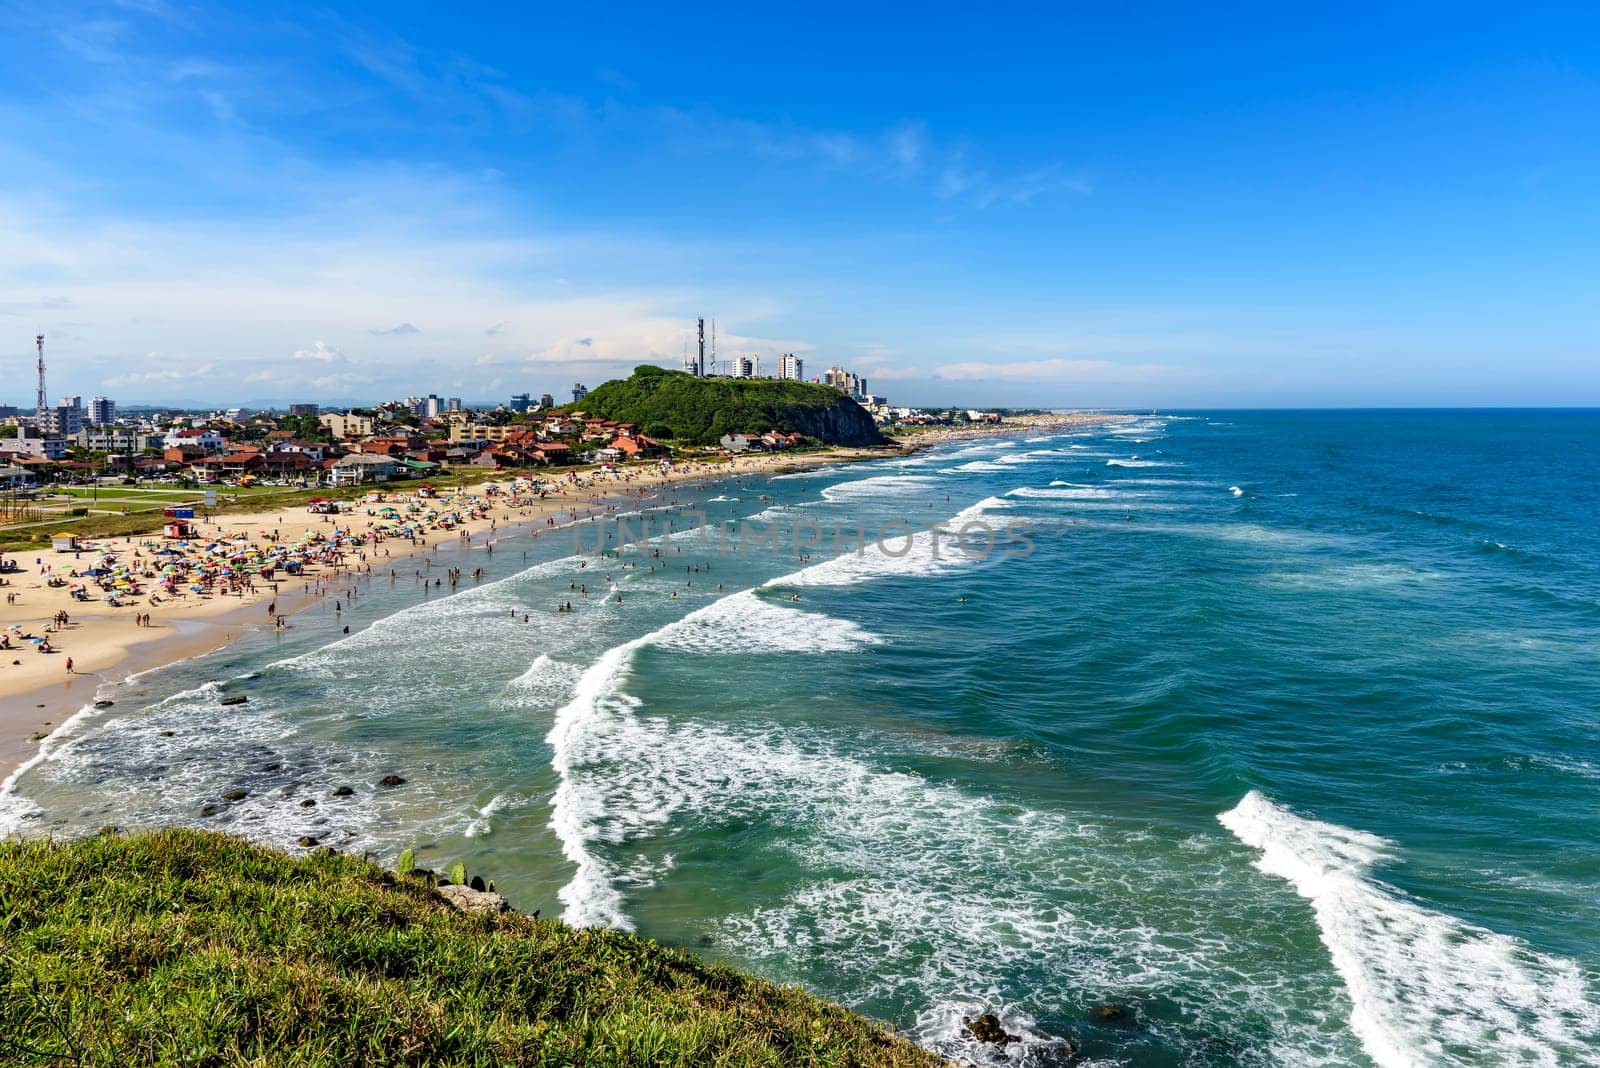 Crowded beach and the city on a beautiful sunny day in the summer of Torres city on the coast of Rio Grande do Sul state, Brazil